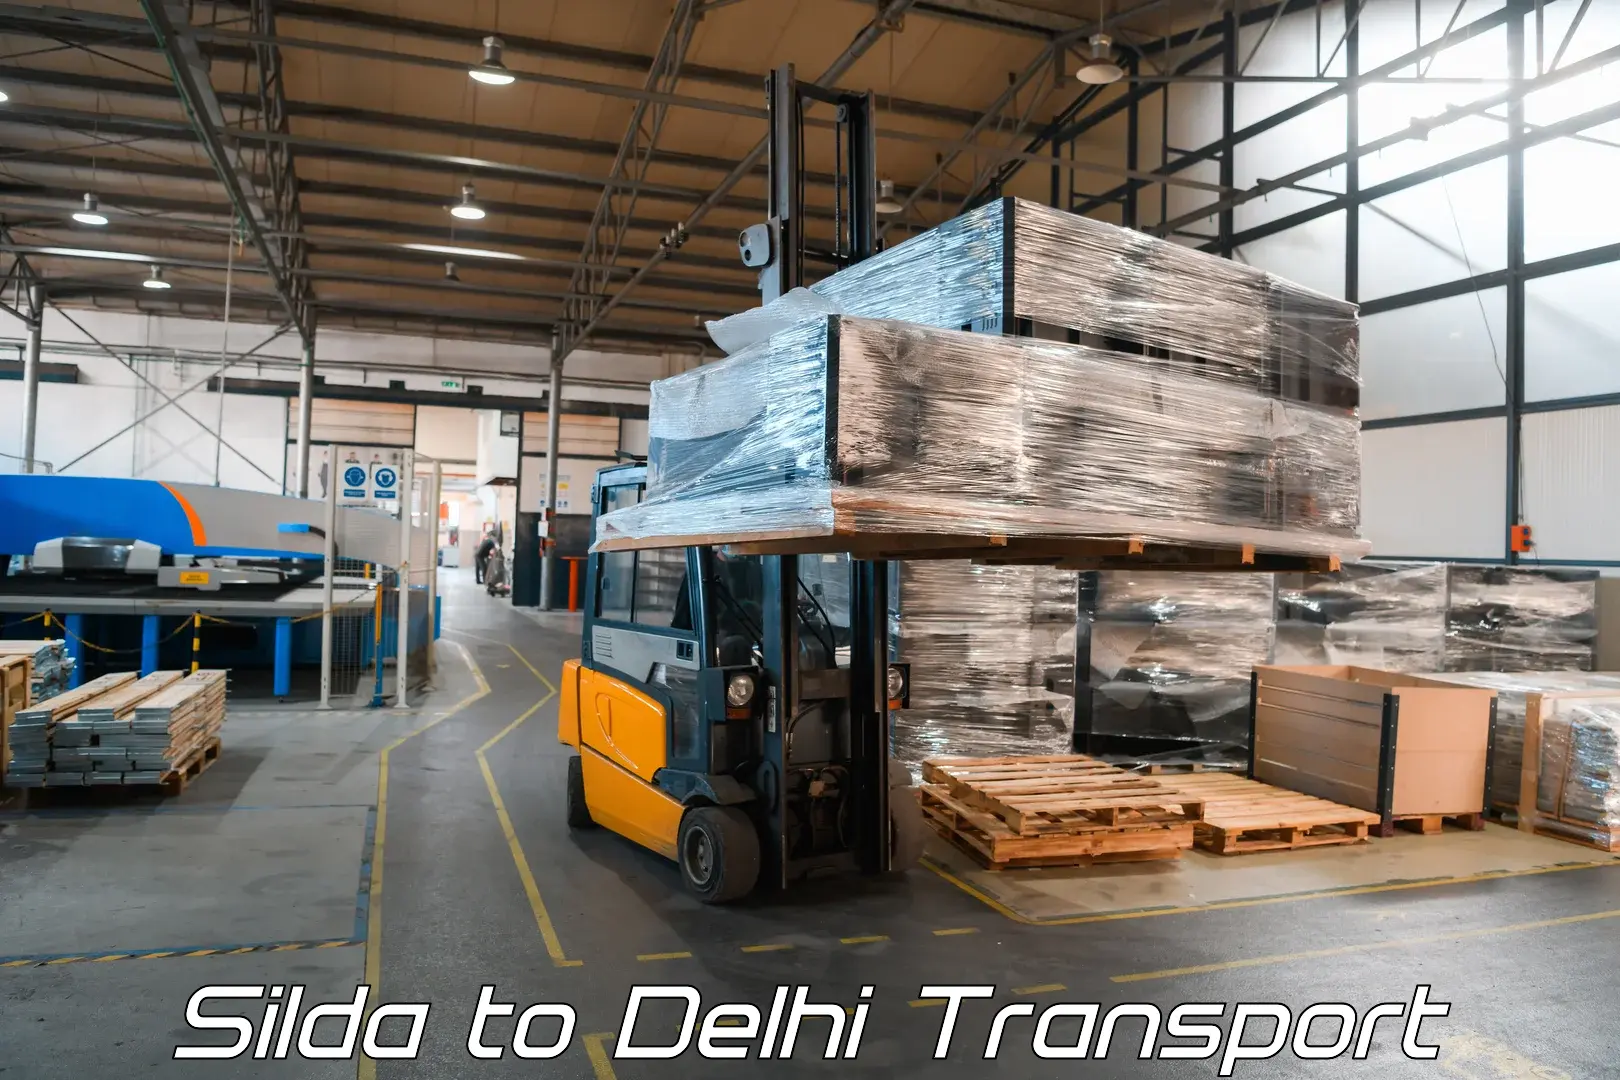 Transport bike from one state to another Silda to University of Delhi